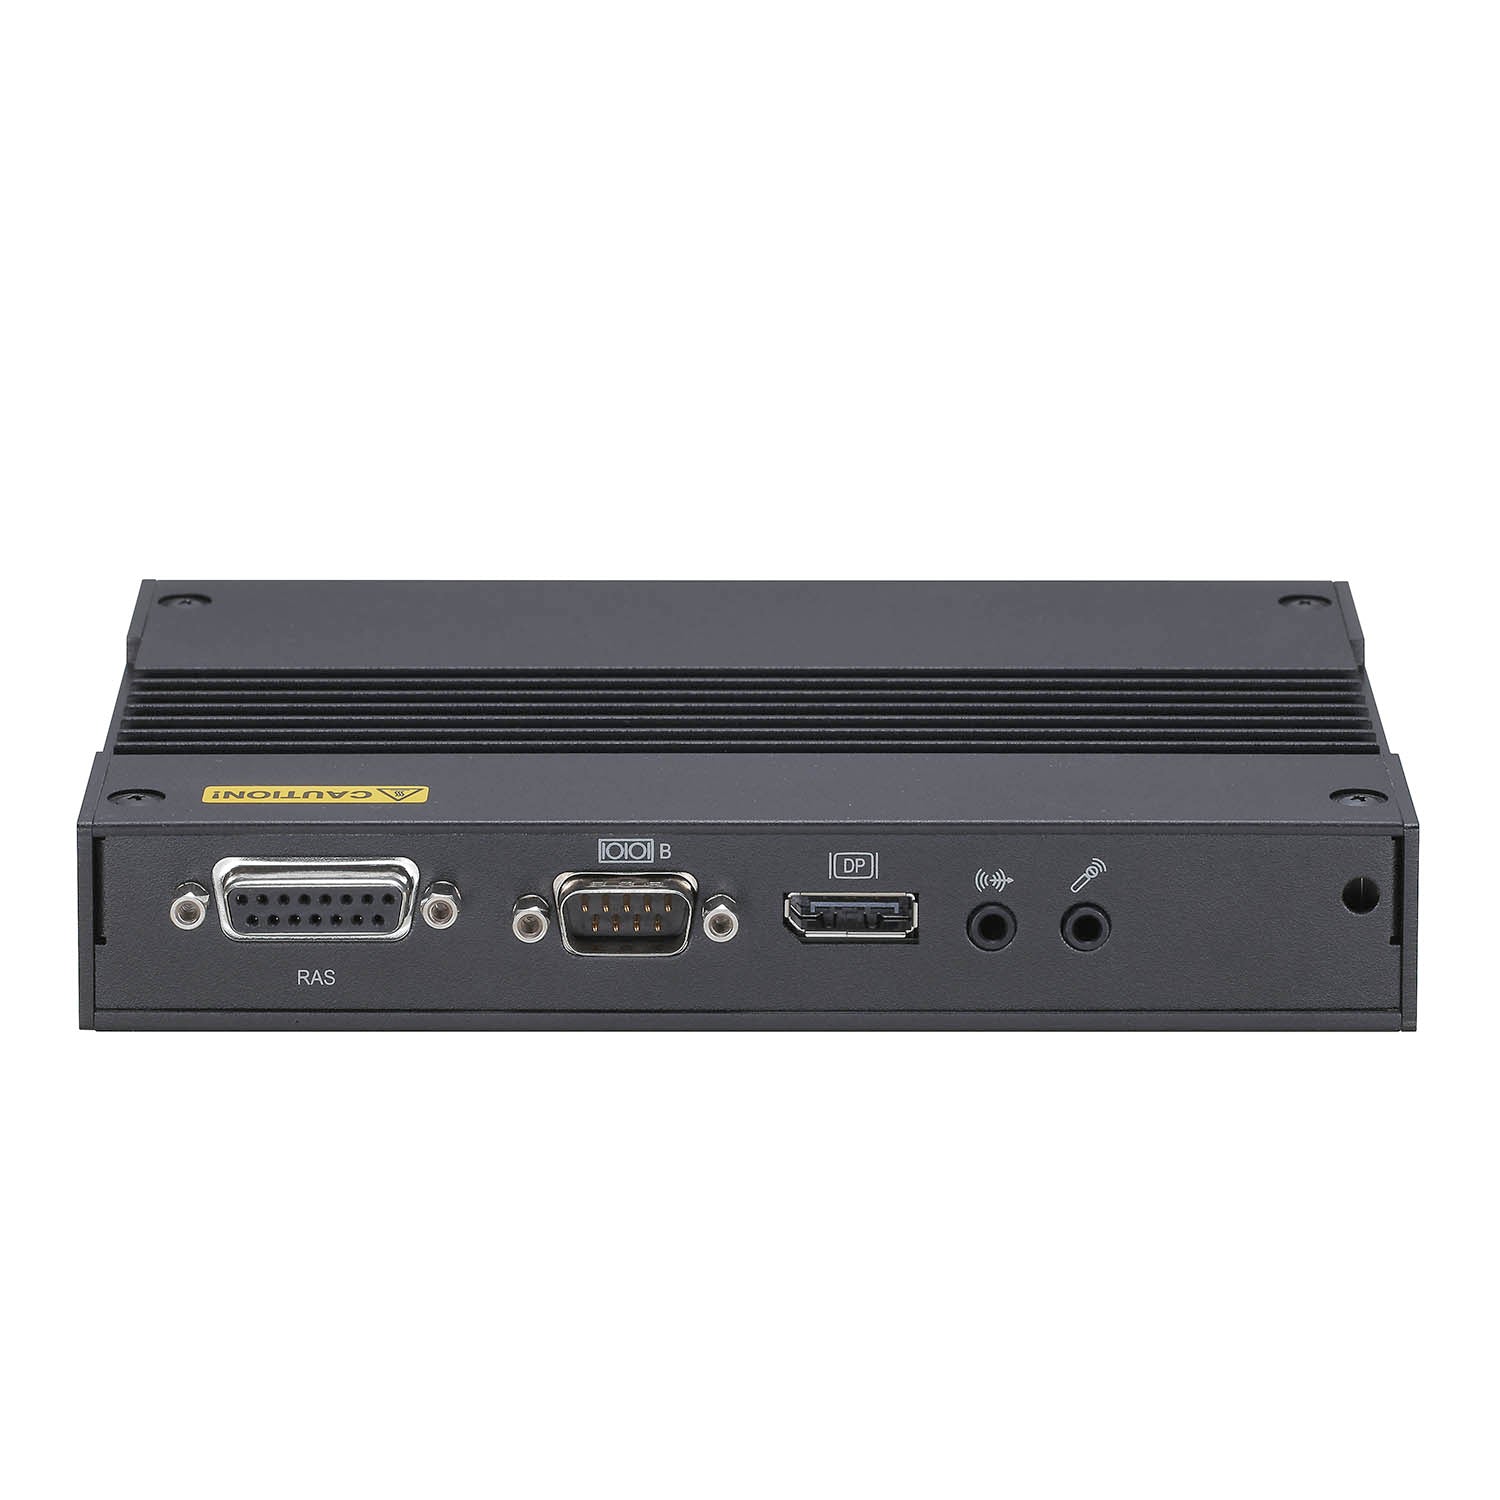 BX-220 Fanless Embedded PC / Thin Client / Intel Atom E3845 (Bay Trail) / 12-24VDC Input / 0-60C Operation